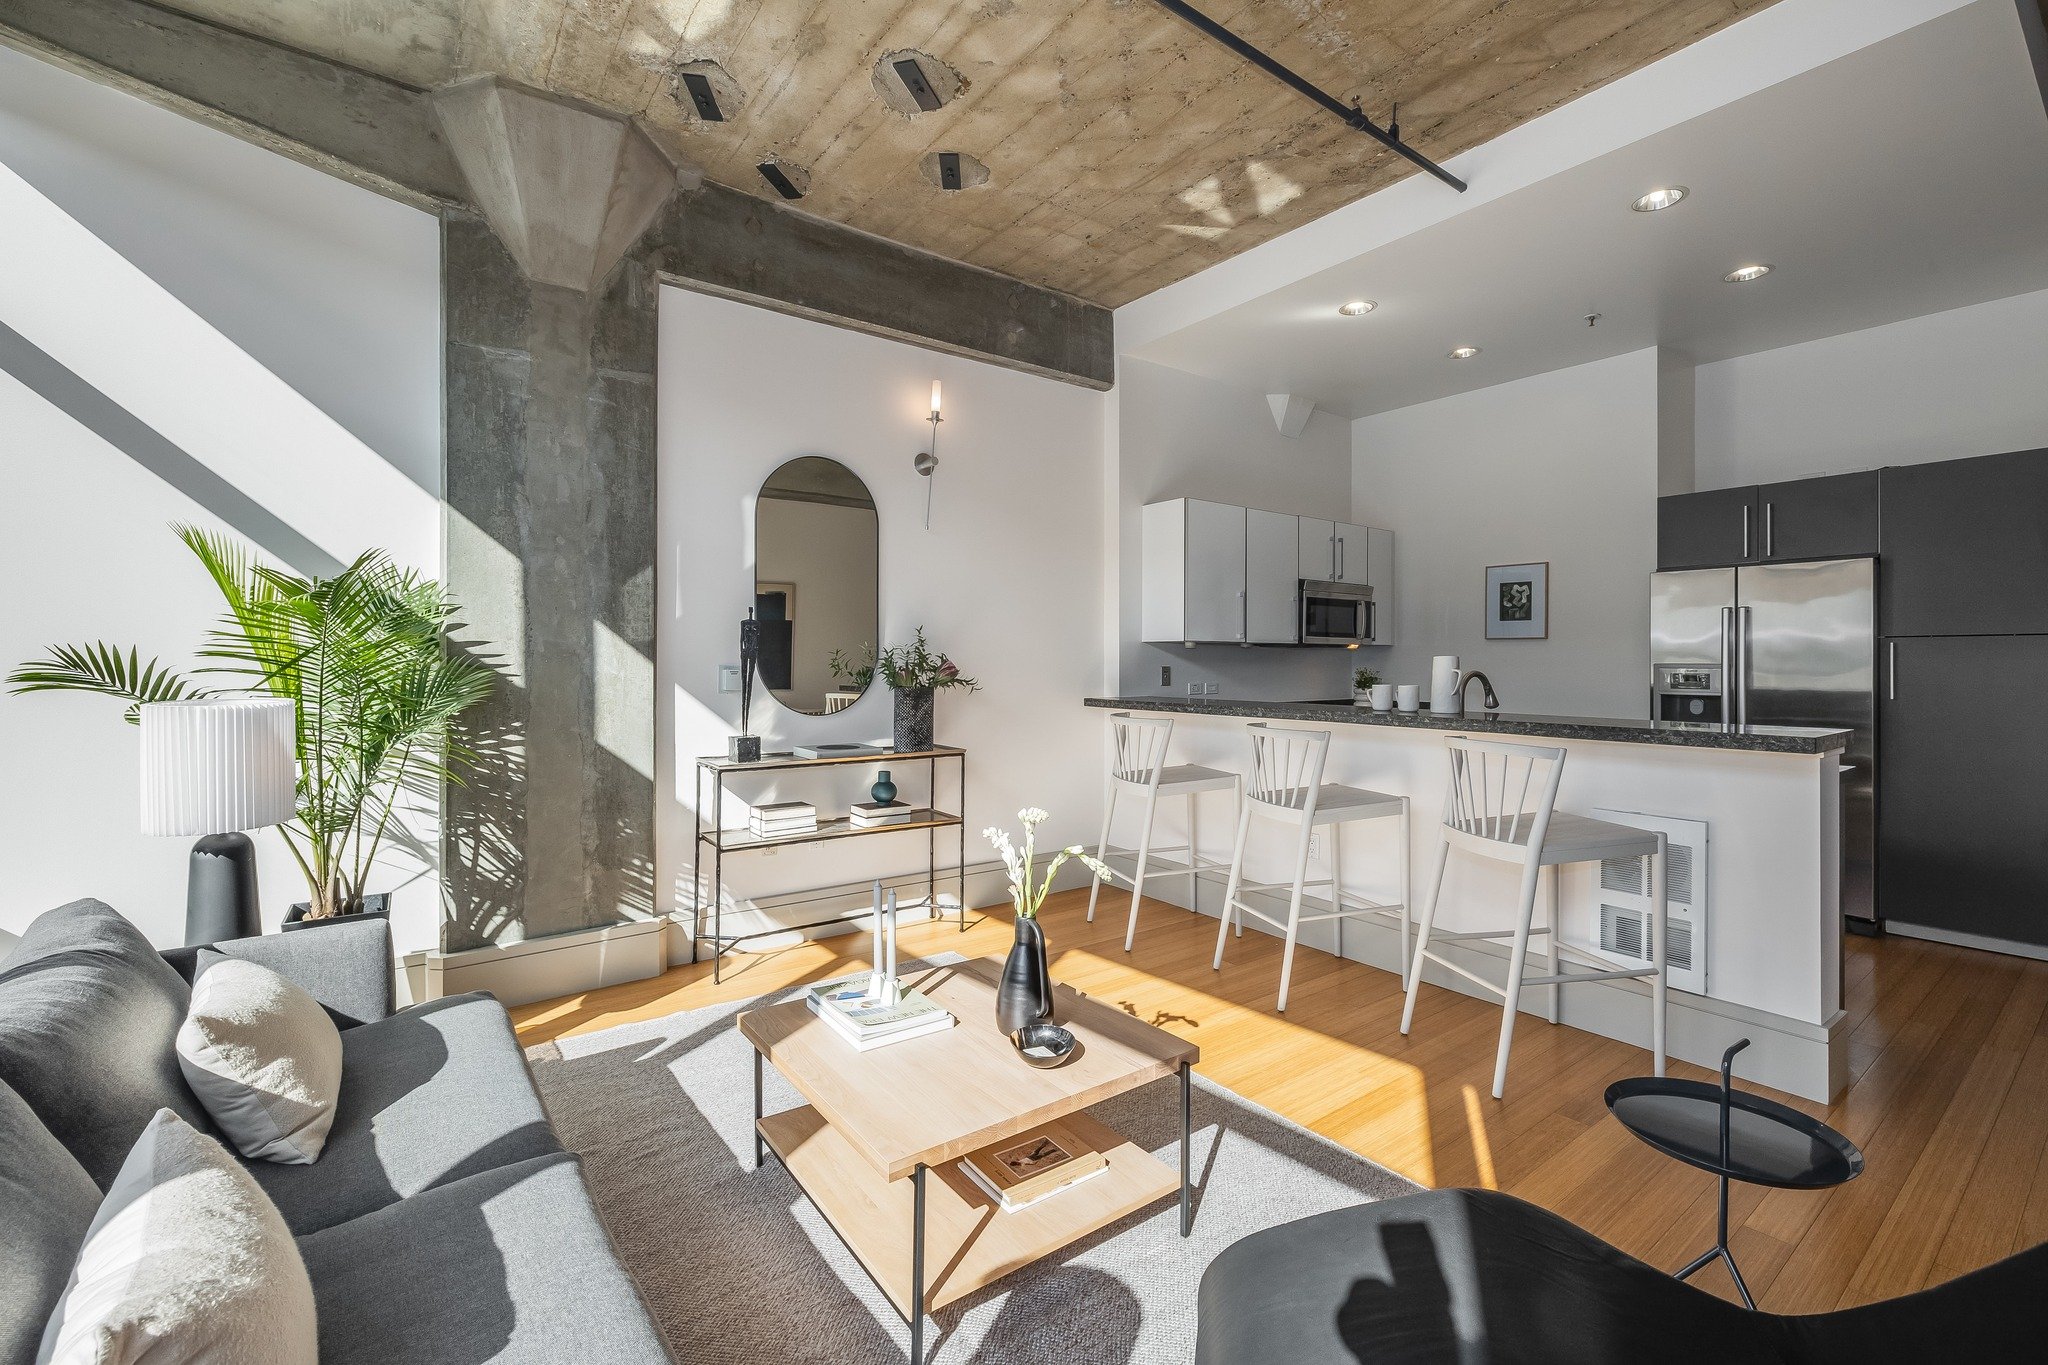 Client Spotlight: Mike Annunziata, Northpoint Real Estate

Welcome to 1 South Park, a boutique warehouse conversion building, located at the crown of San Francisco&rsquo;s historic South Park neighborhood. Unit 210, an elegant one-bedroom, one-bathro